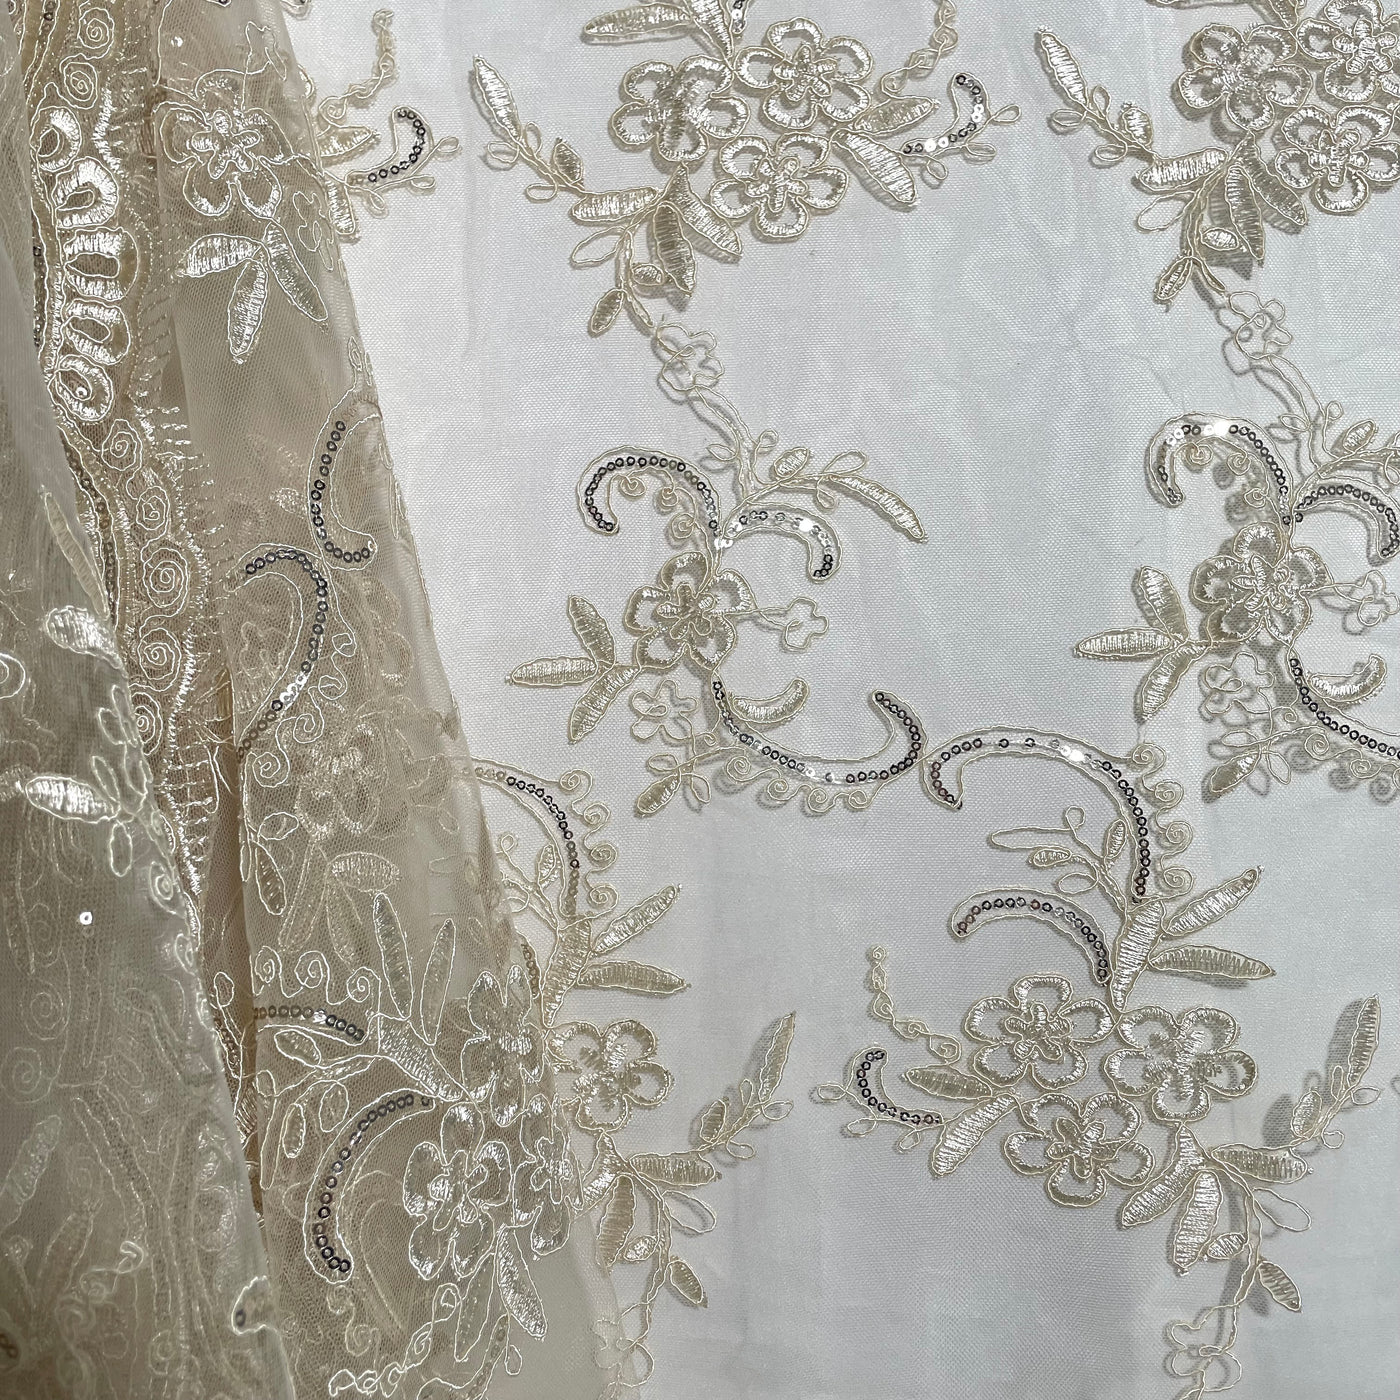 Beaded & Corded Lace Fabric Embroidered on 100% Polyester Net Mesh | Lace USA